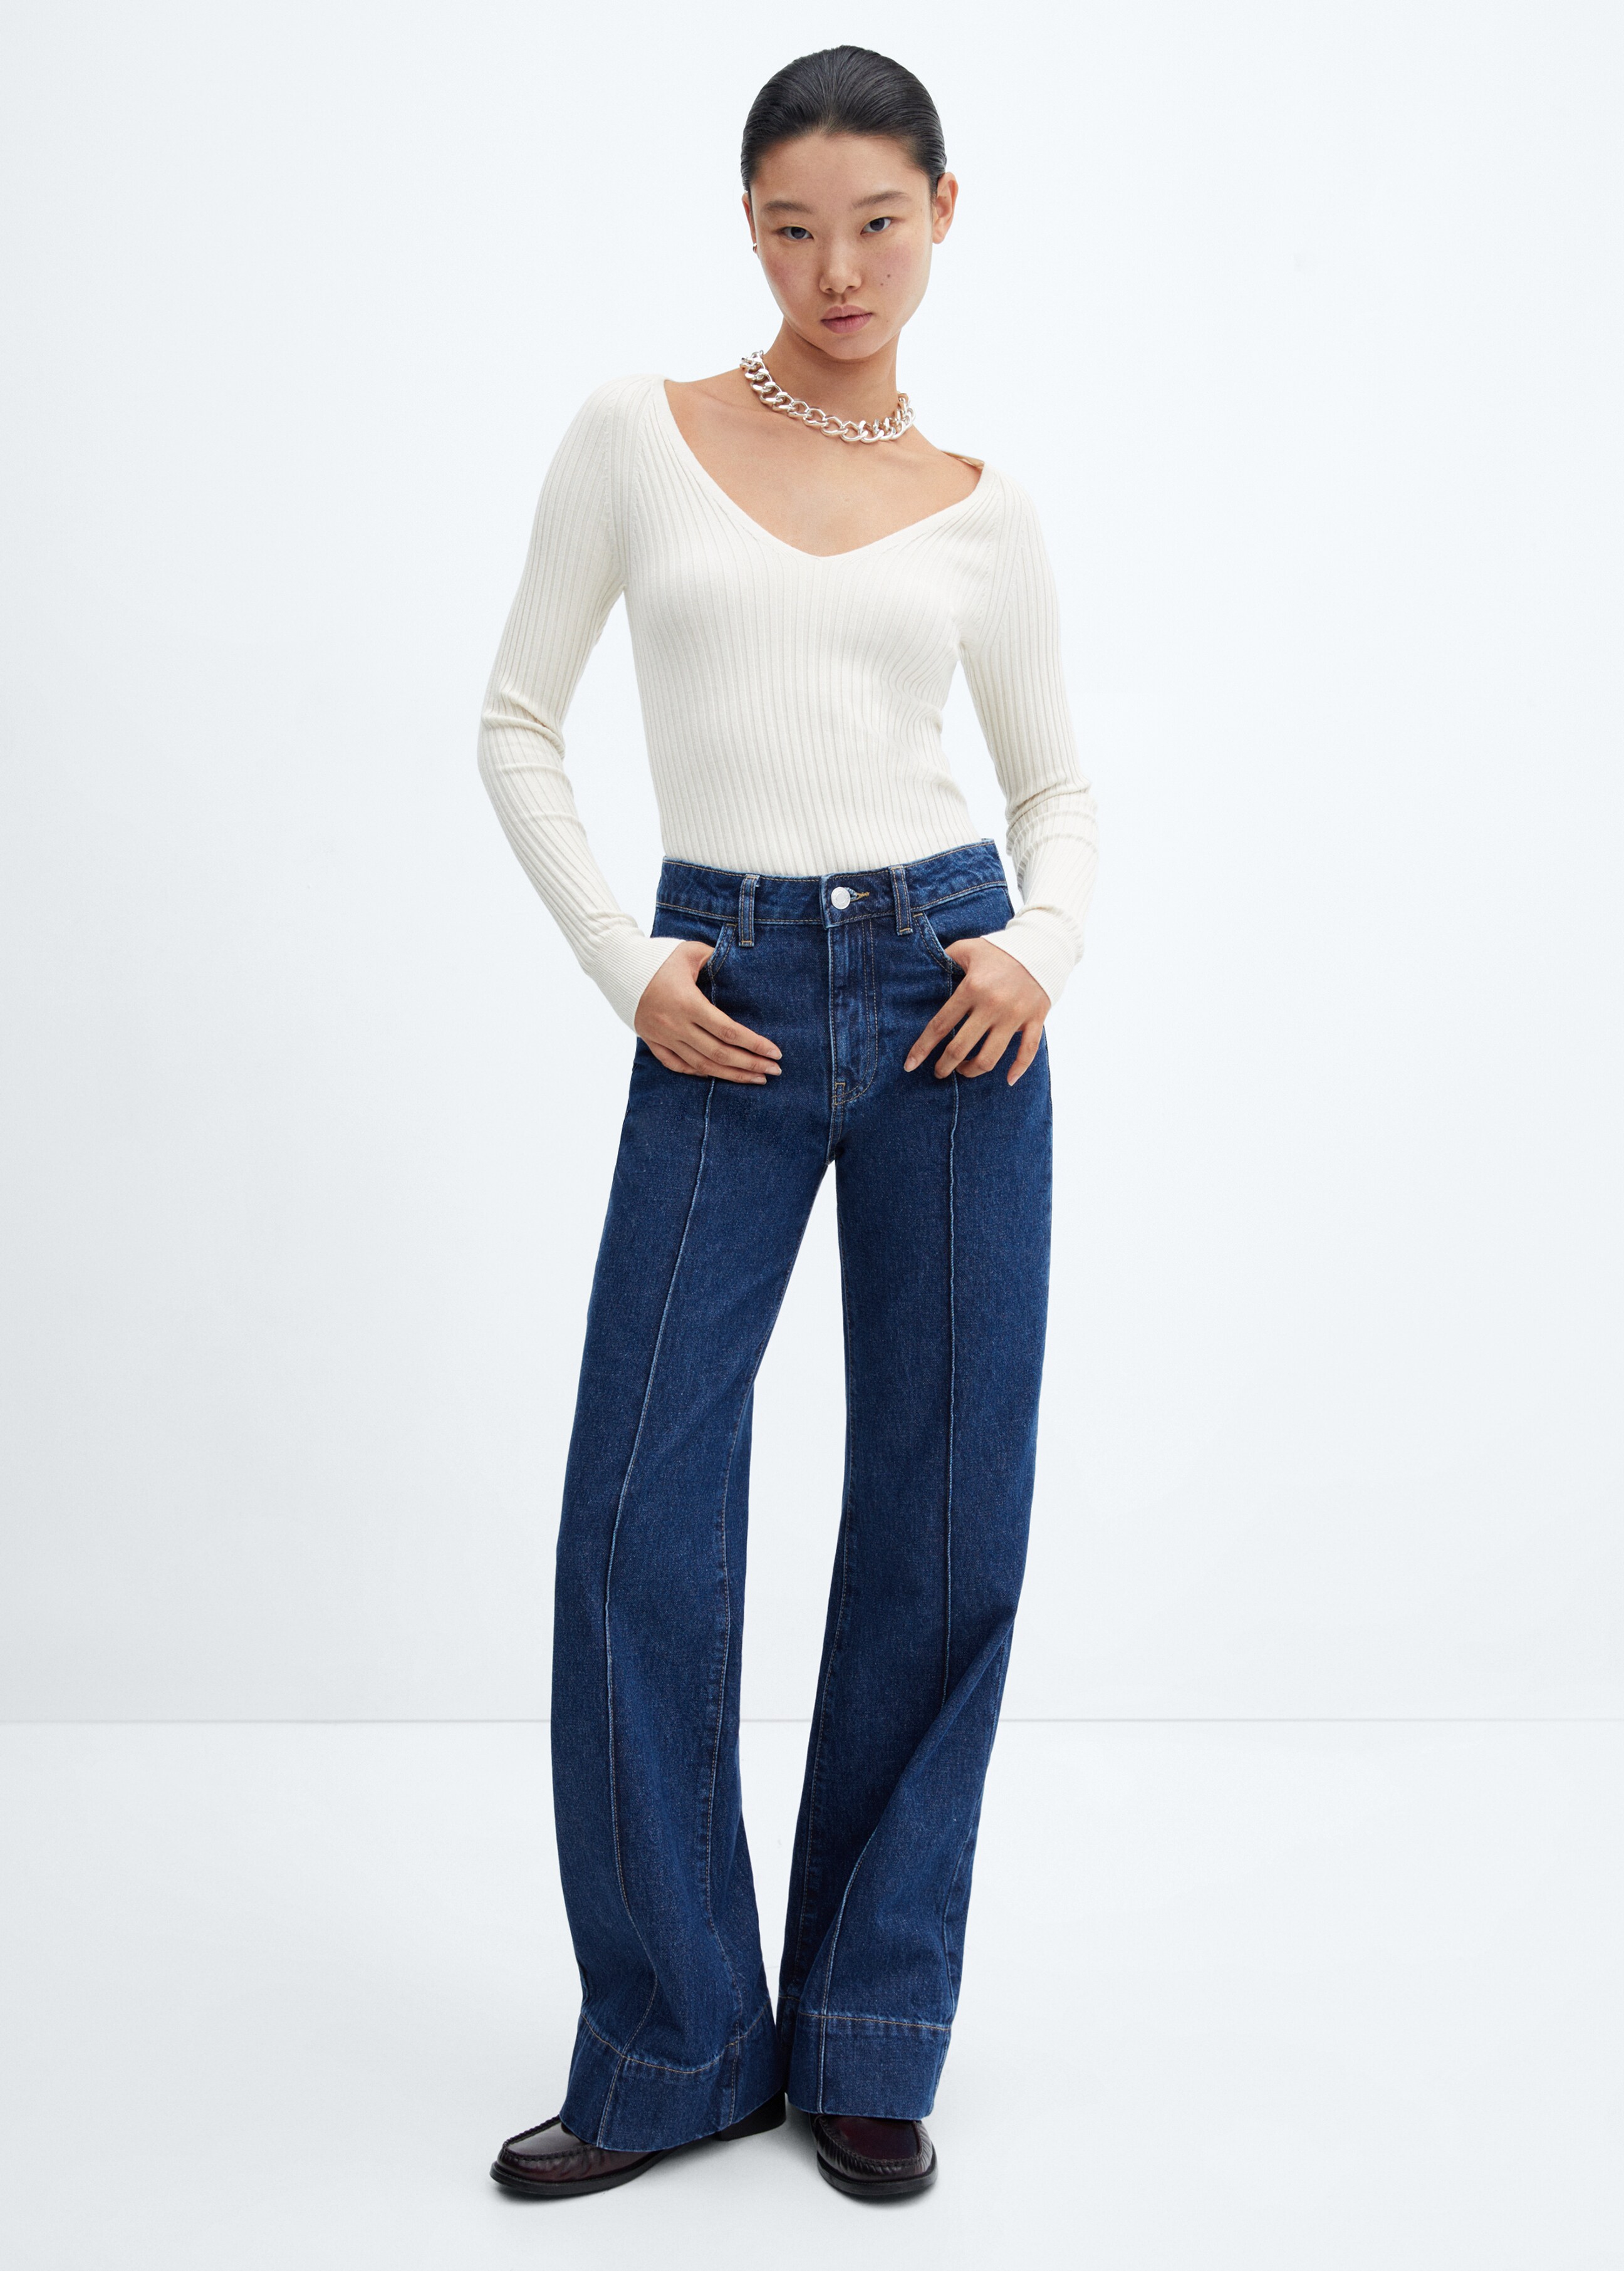 Wideleg jeans with decorative seams - General plane